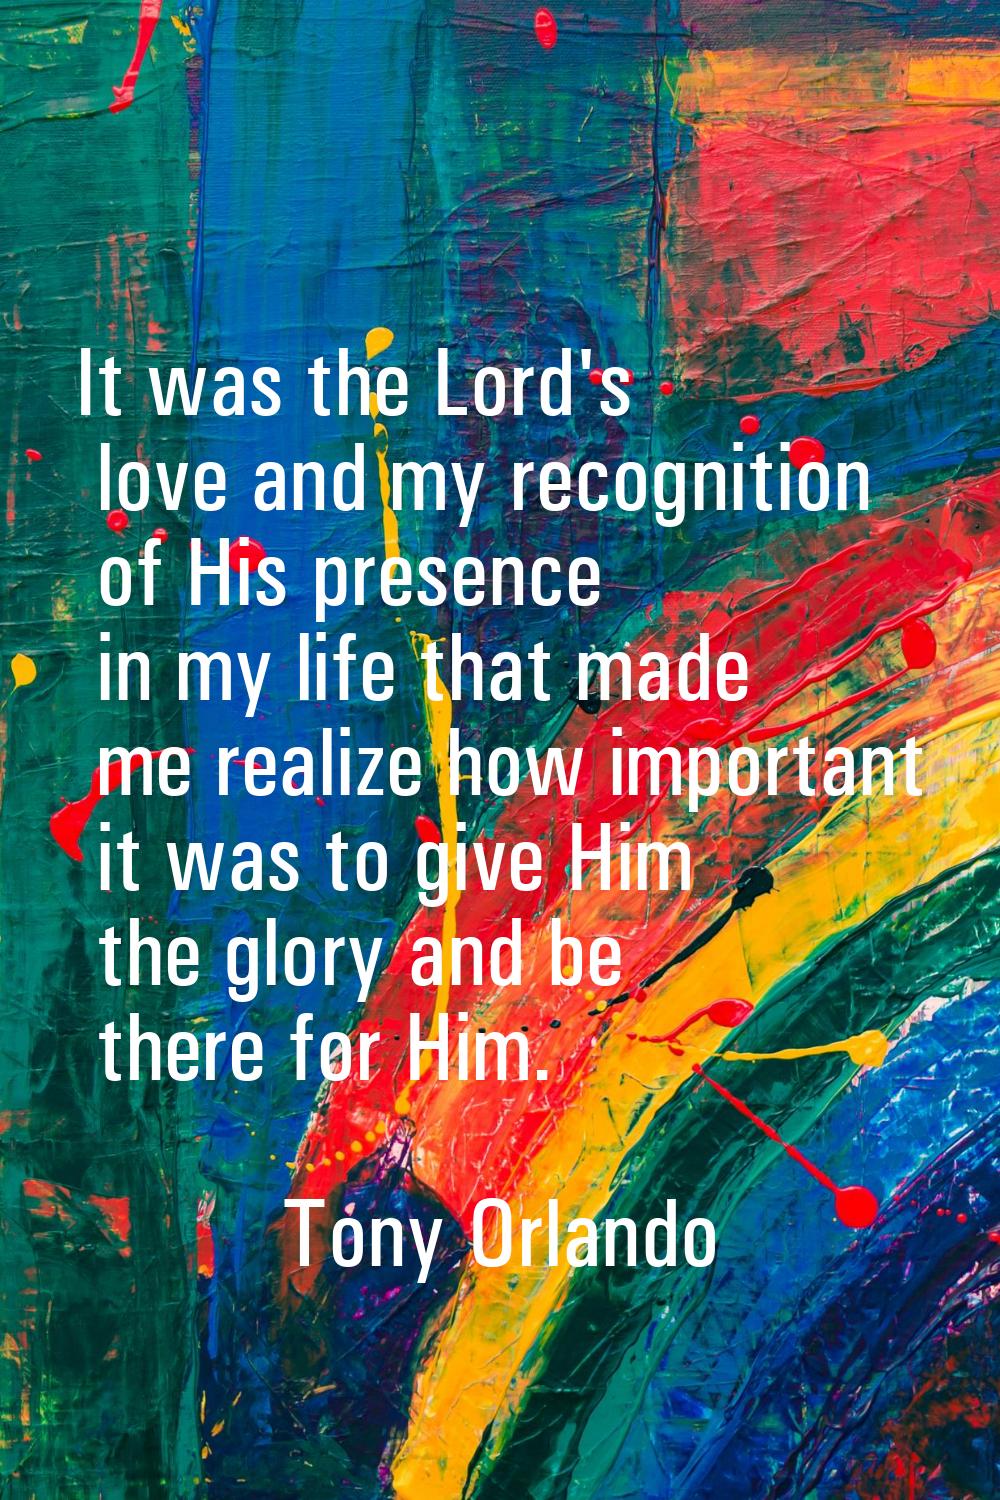 It was the Lord's love and my recognition of His presence in my life that made me realize how impor